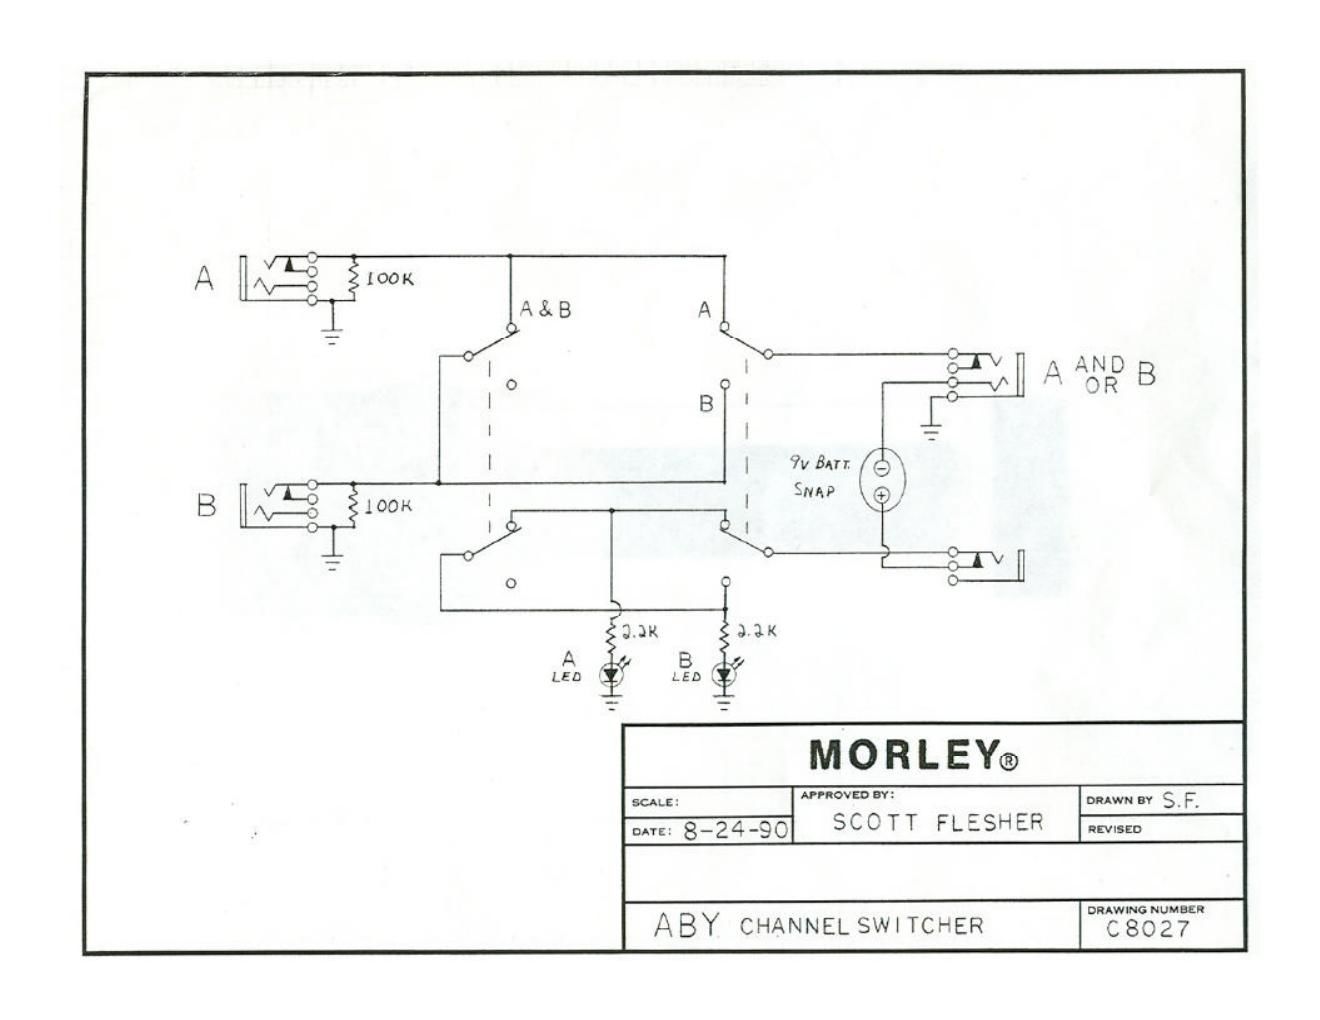 Morley ABY Switchbox Schematic